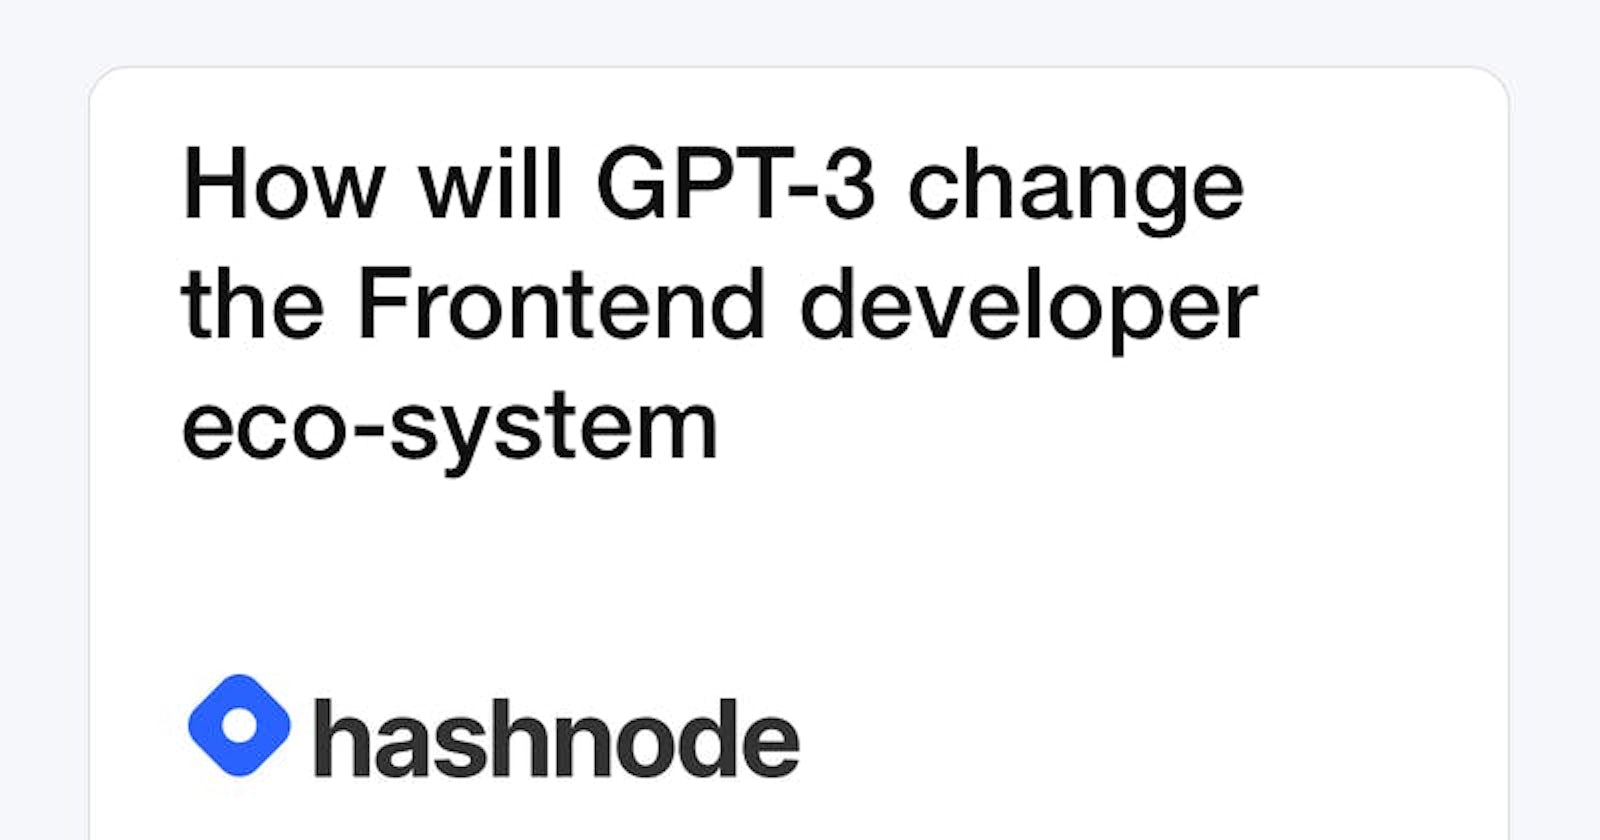 How will GPT-3 change the Frontend developer eco-system